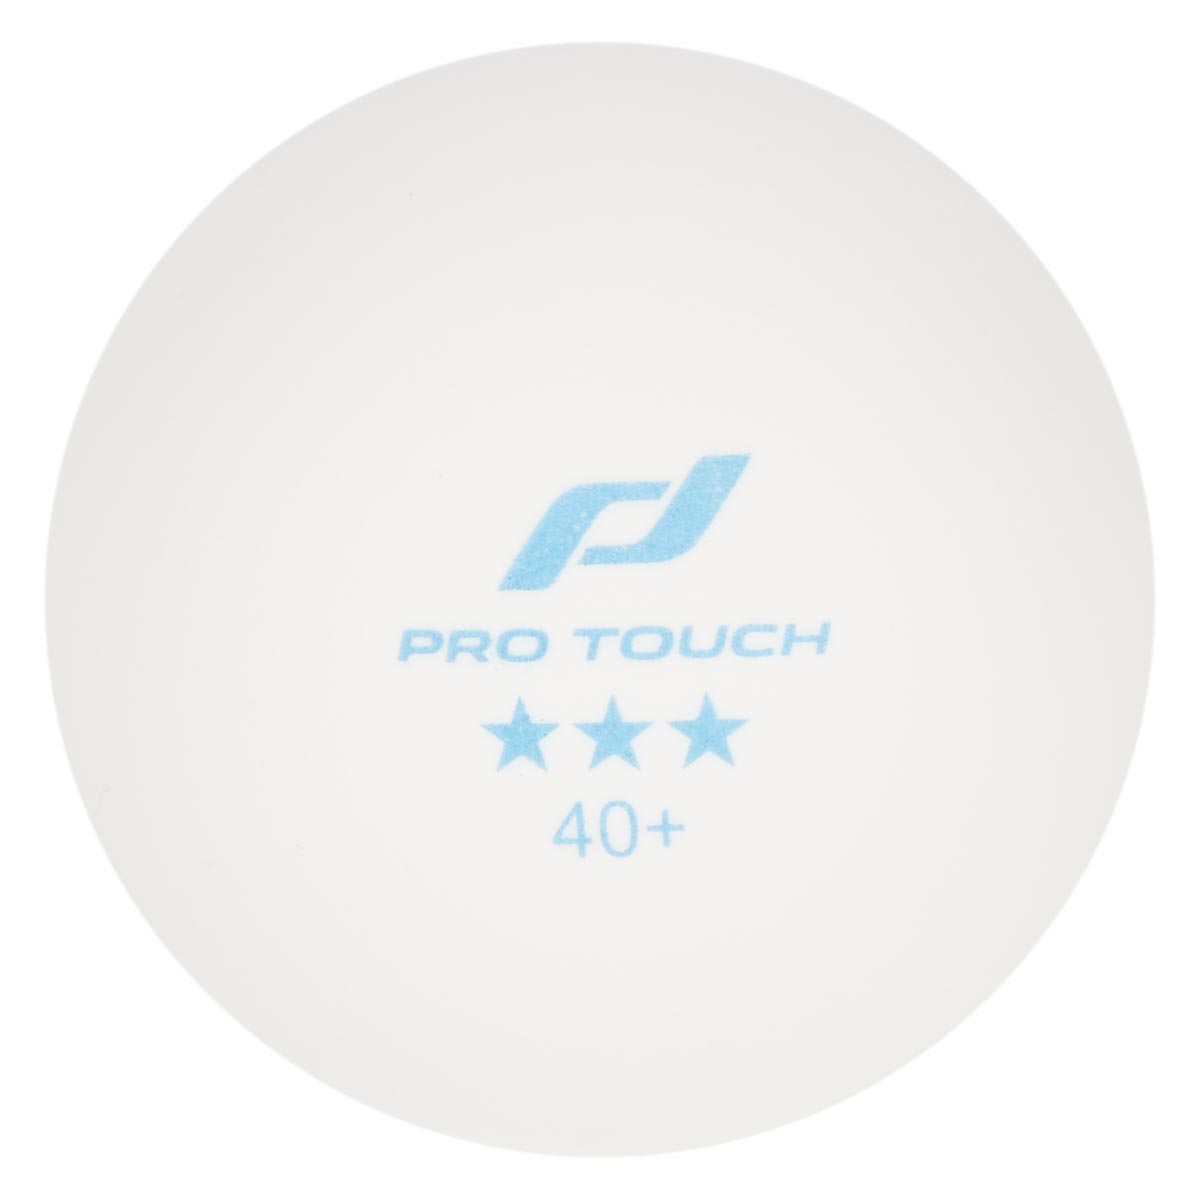 PRO TOUCH PRO TABLE TENNIS BALLS - 3 PACK